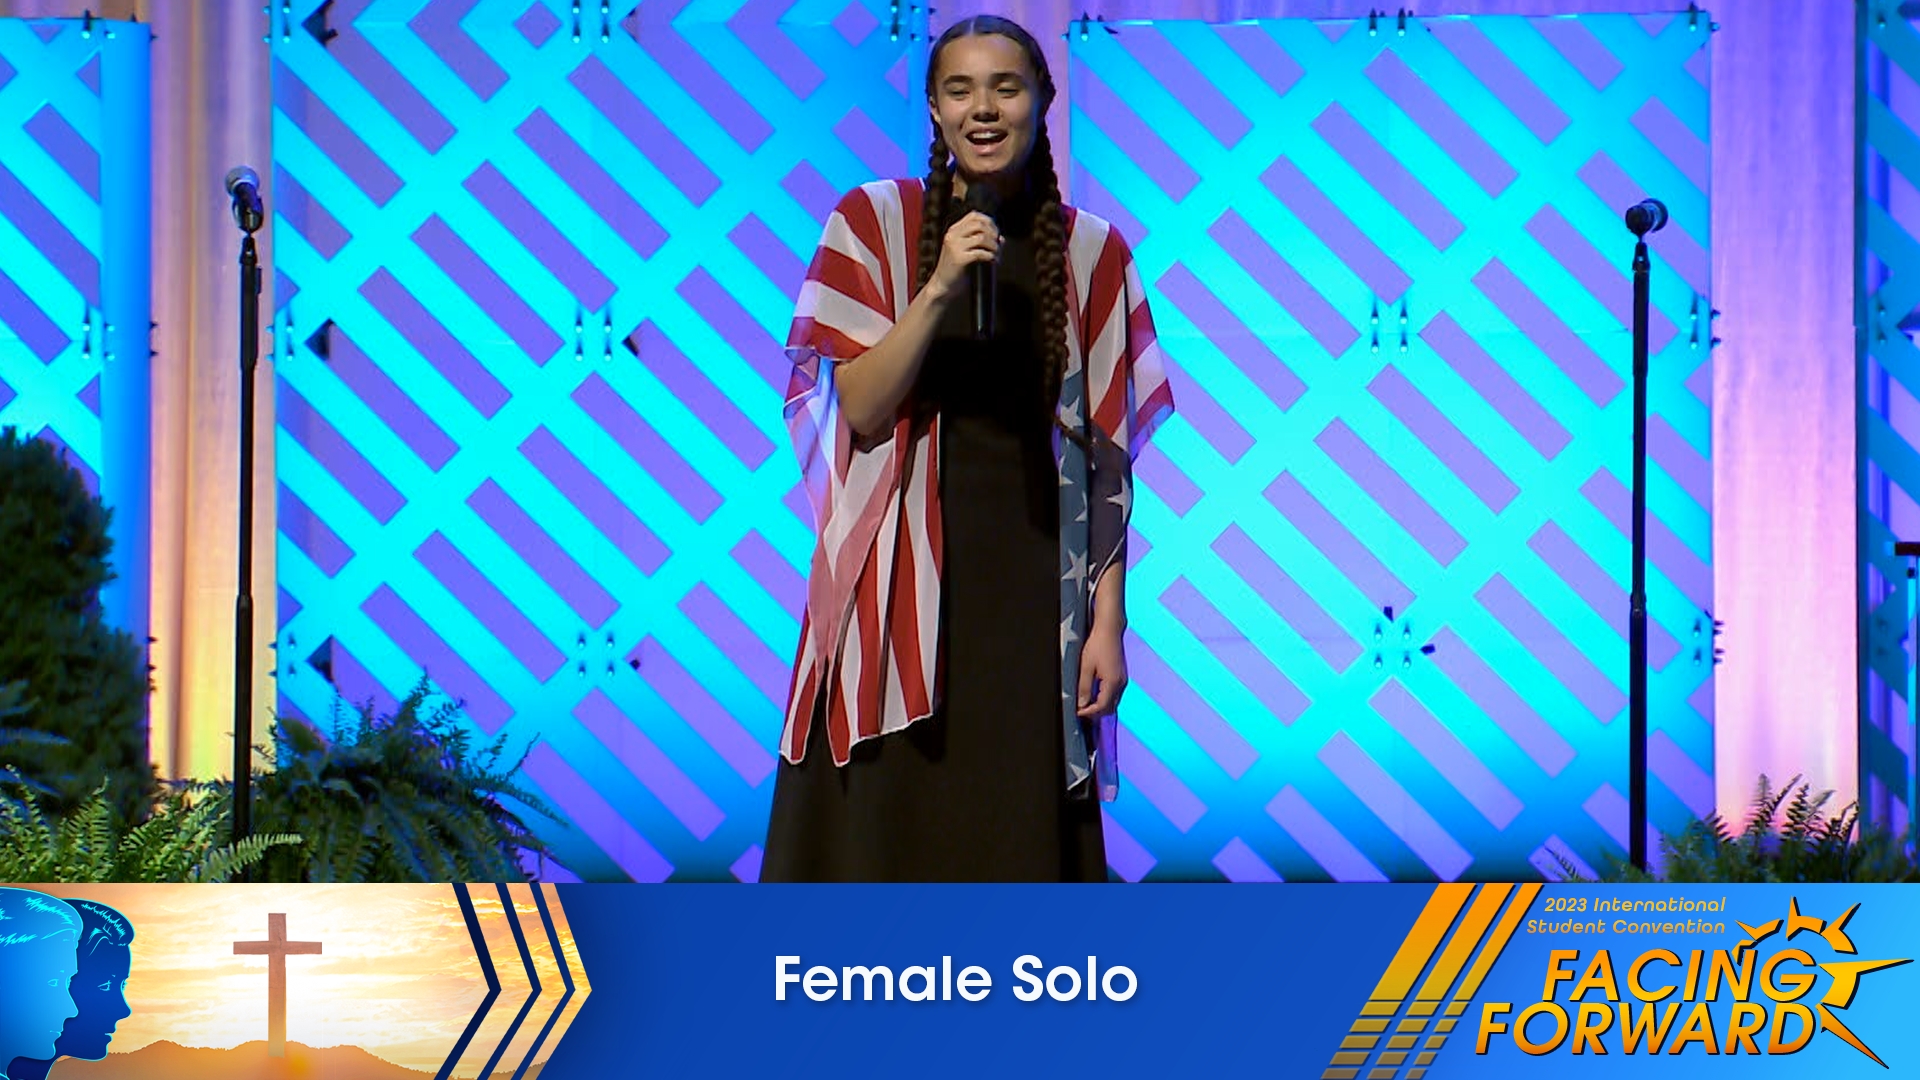 Female Solo, "Heal Our Land" - ISC 2023